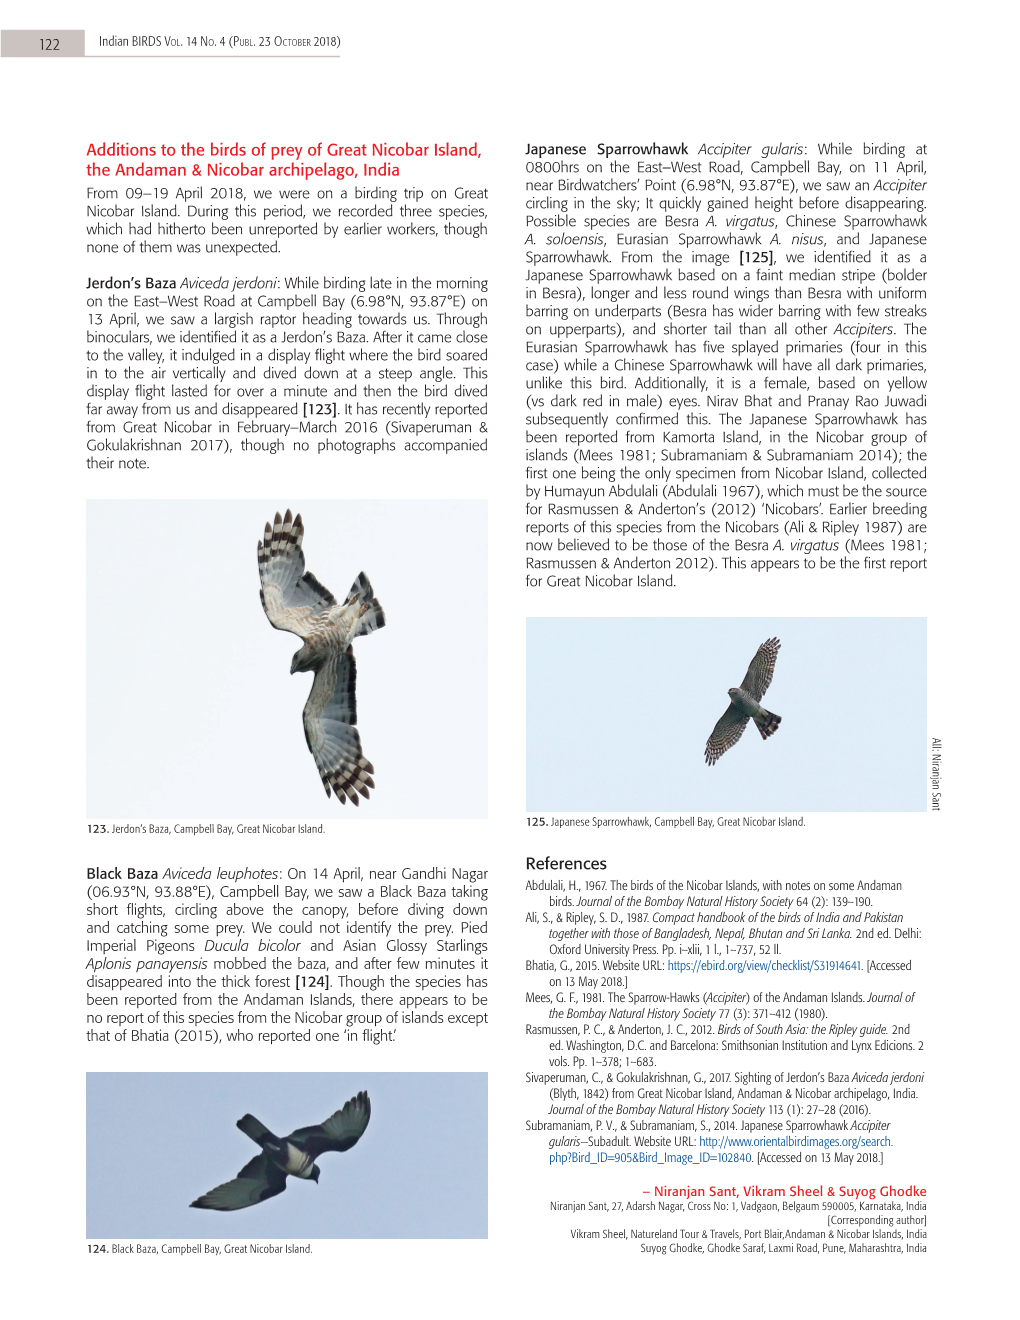 Additions to the Birds of Prey of Great Nicobar Island, the Andaman